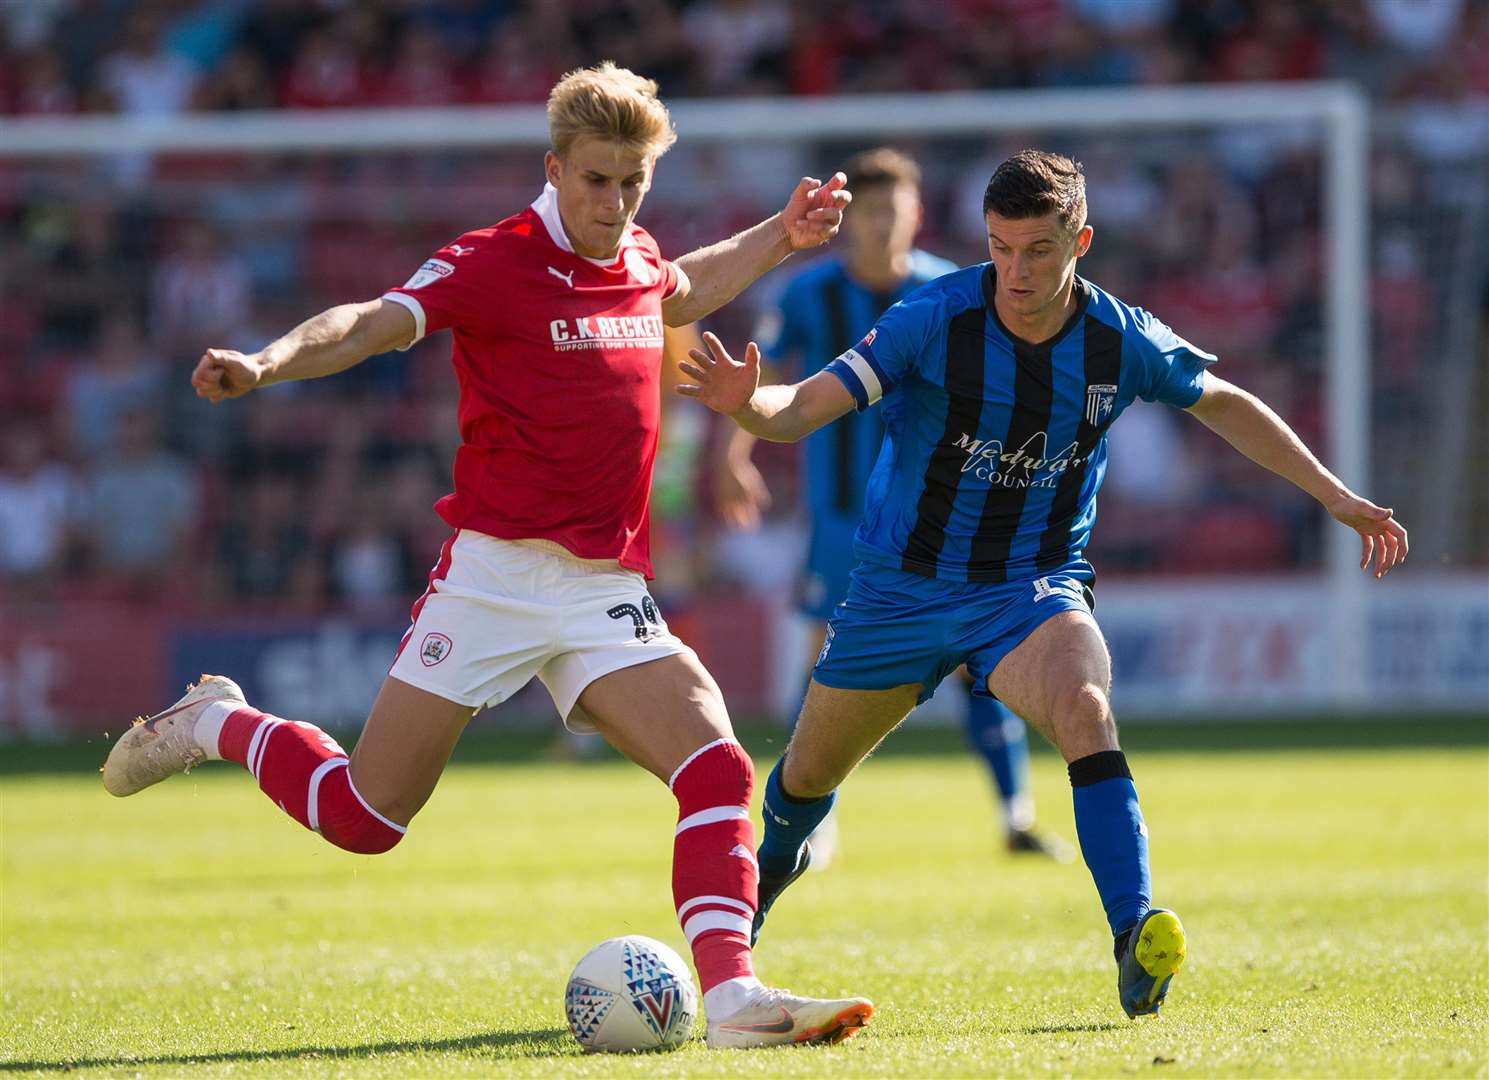 Callum Reilly in action for the Gills at Barnsley Picture: Ady Kerry